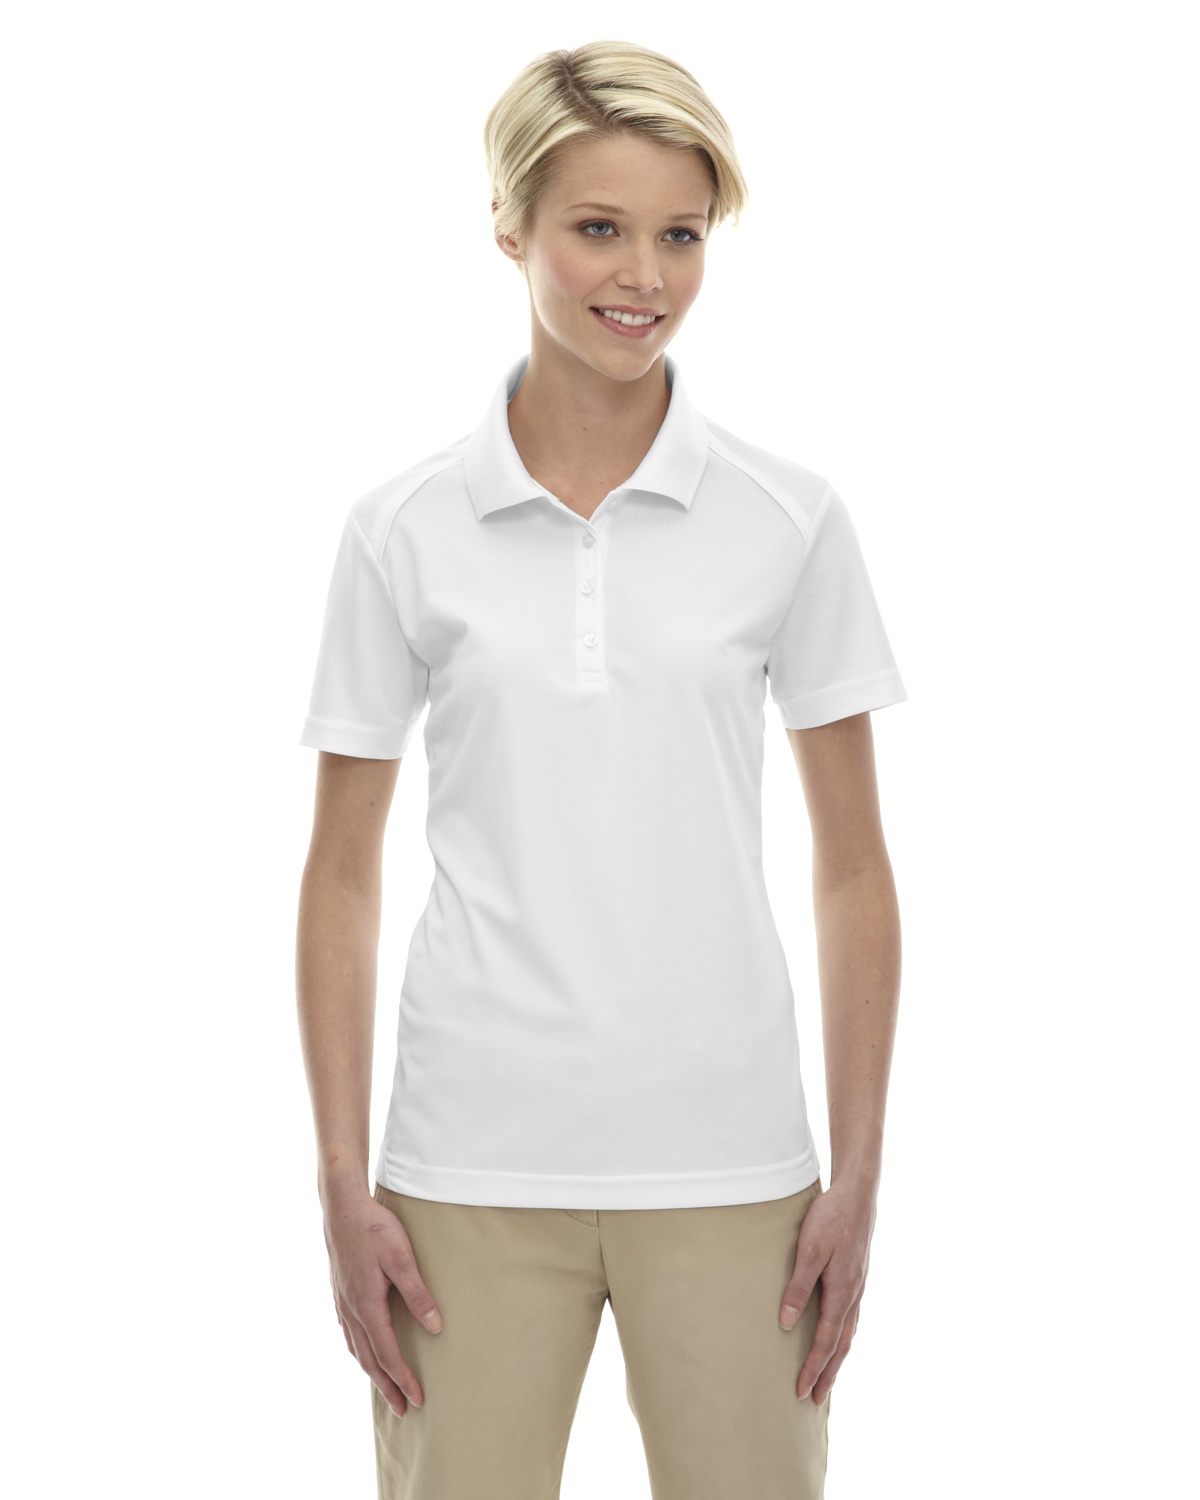 'Ash City Extreme 75108 Ladies Eperformance Shield Snag Protection Short Sleeve Polo'